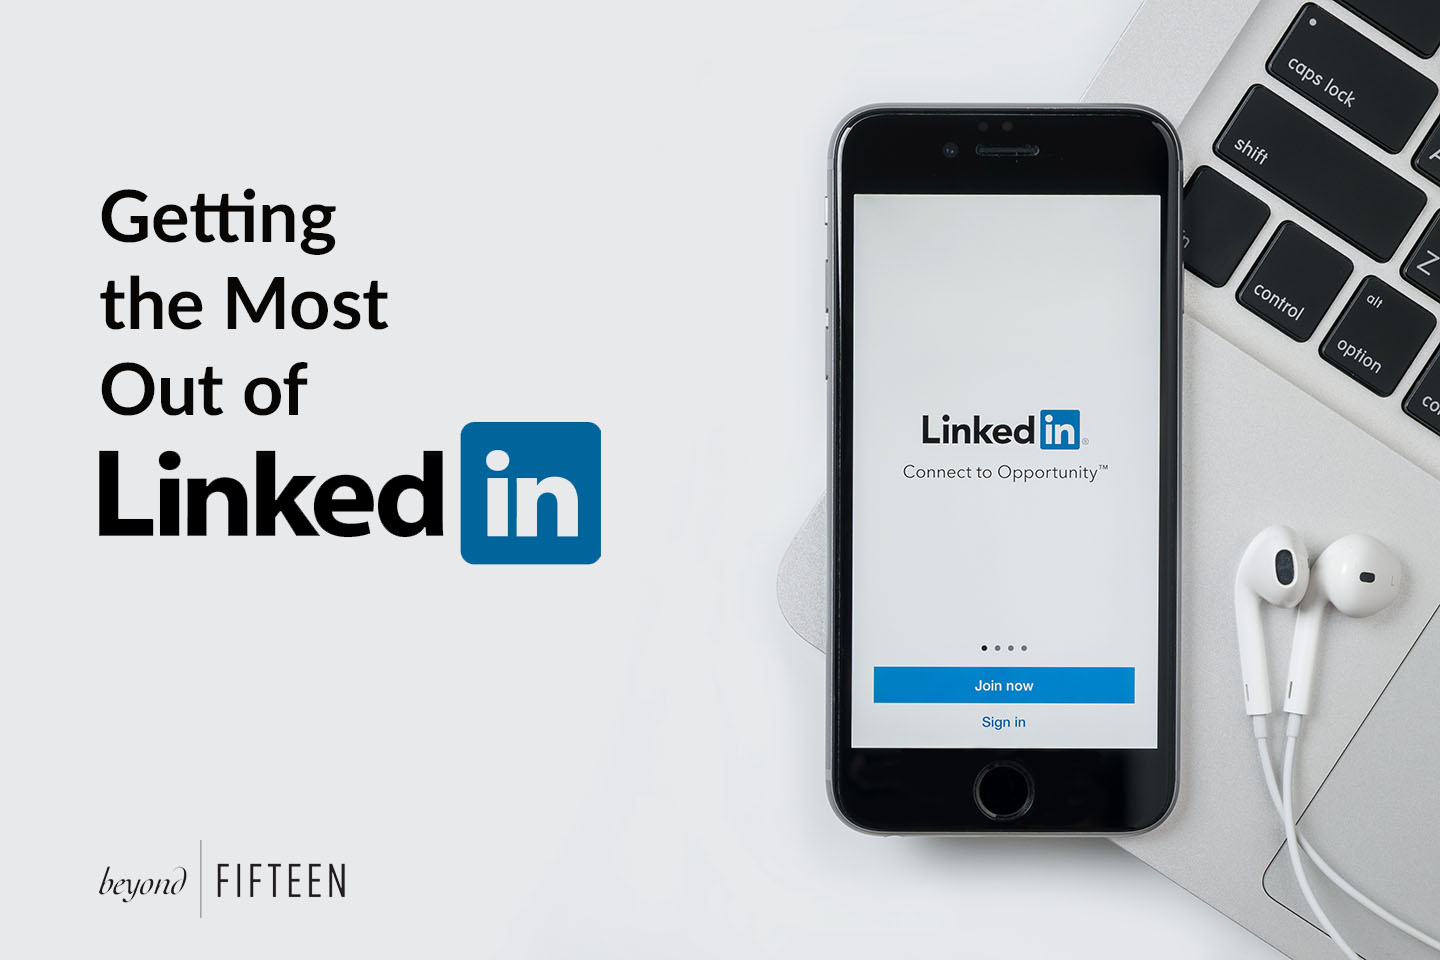 Getting the Most Out of LinkedIn